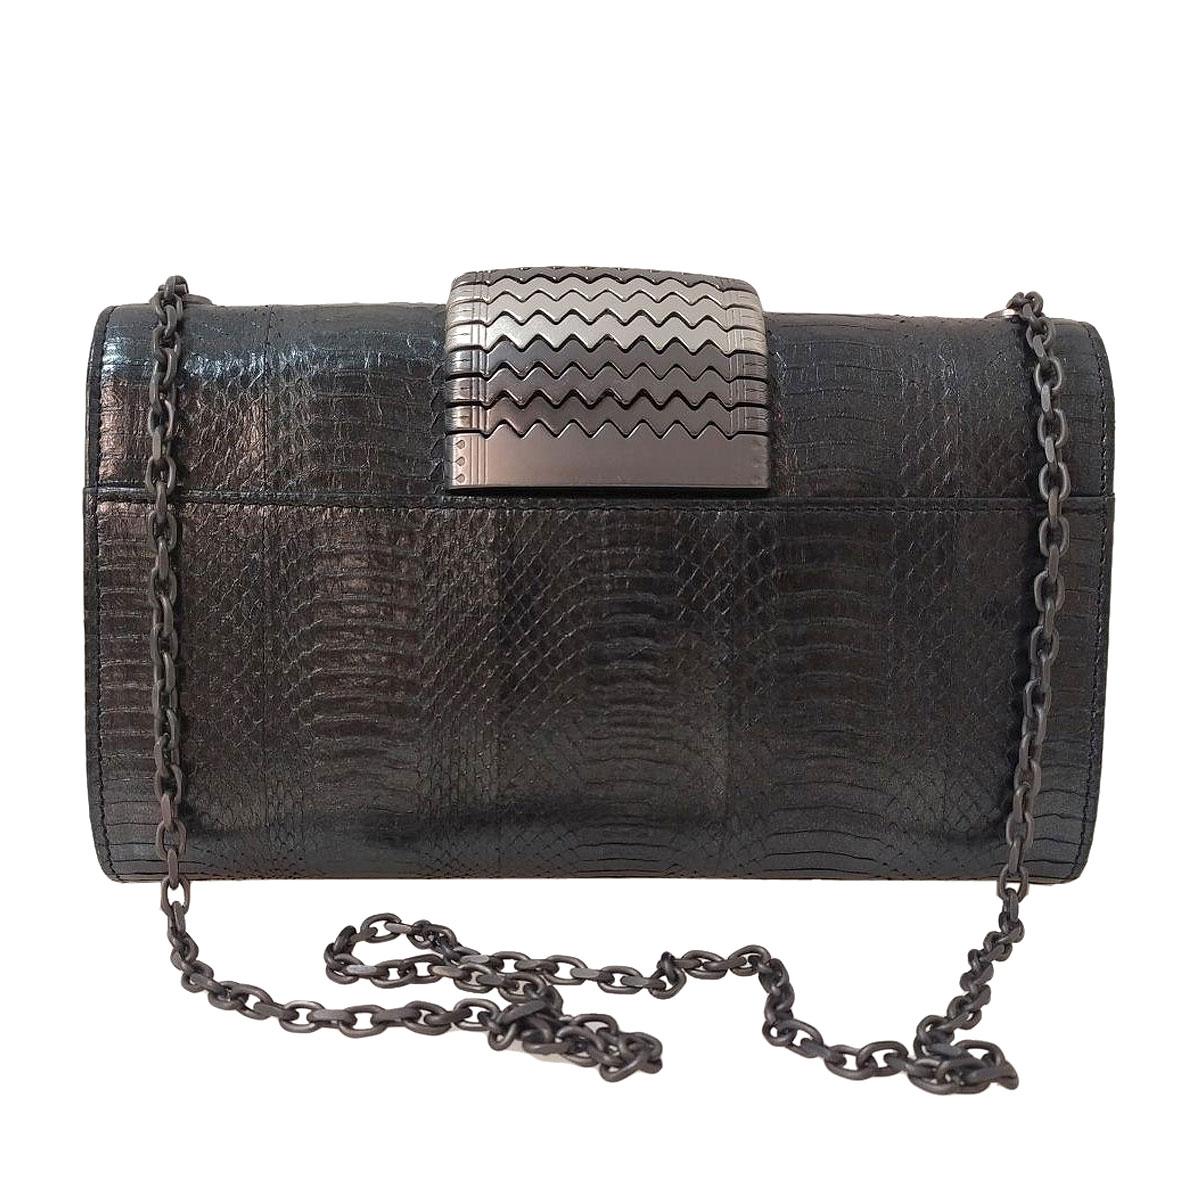 Beautiful Misela bag
Leather
Reptile print
Anthracite color
Central metal element
Metal chain
Magnetic closure
Suede internal
Internal pocket 
Cm 24 x 14 x 6 (19.44 x 5.5 x 2.36 inches)
Original price € 690
Worldwide express shipping included in the